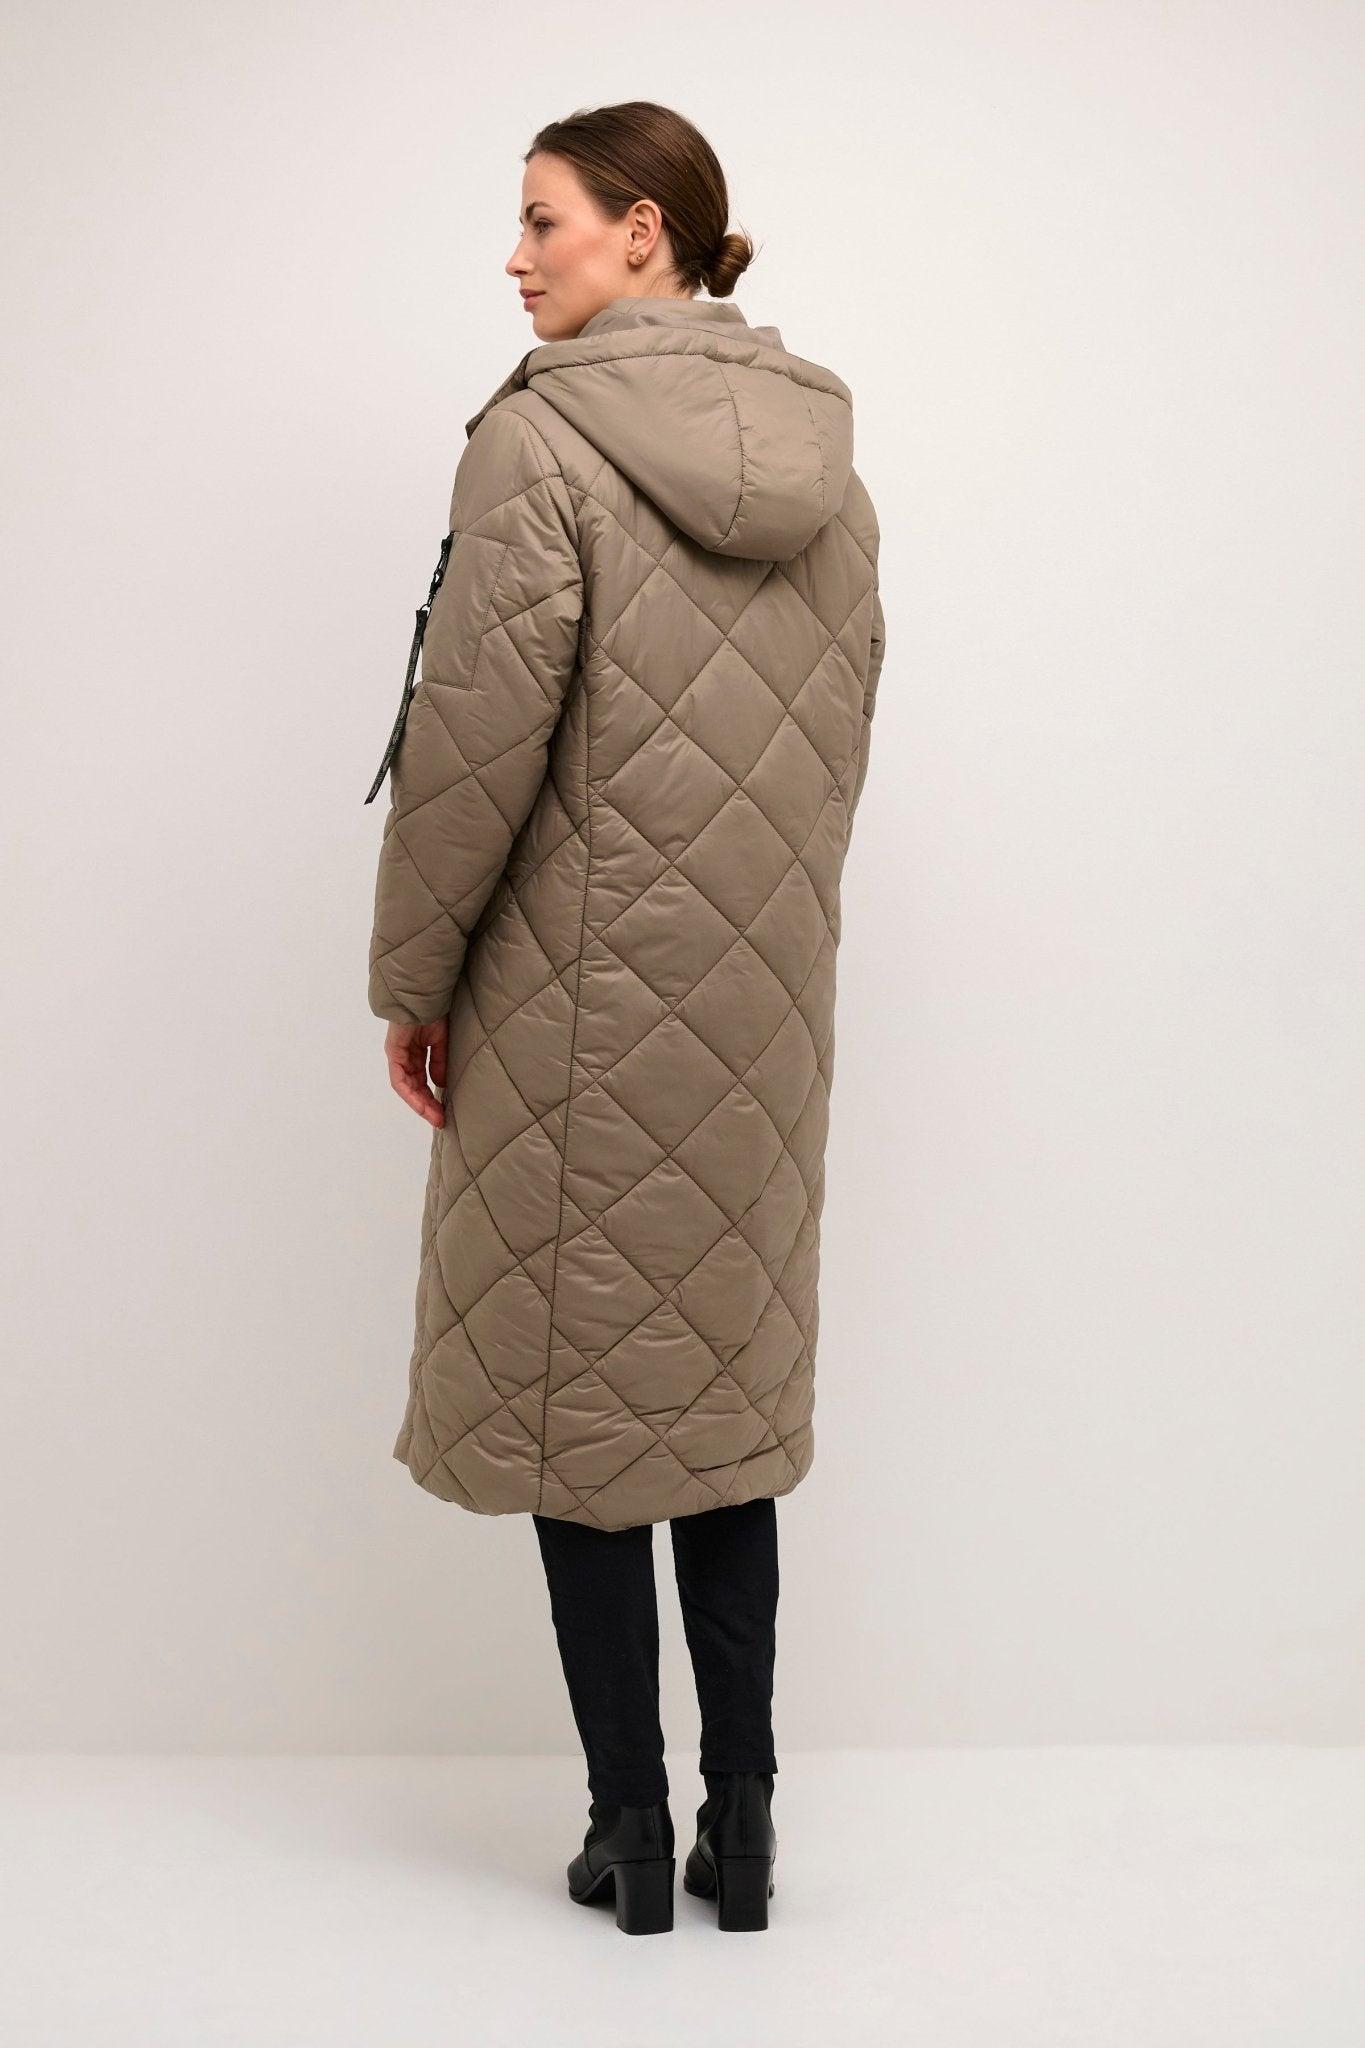 Gaiagro long quilted jacket - brown lentil - Blue Sky Clothing & Lingerie